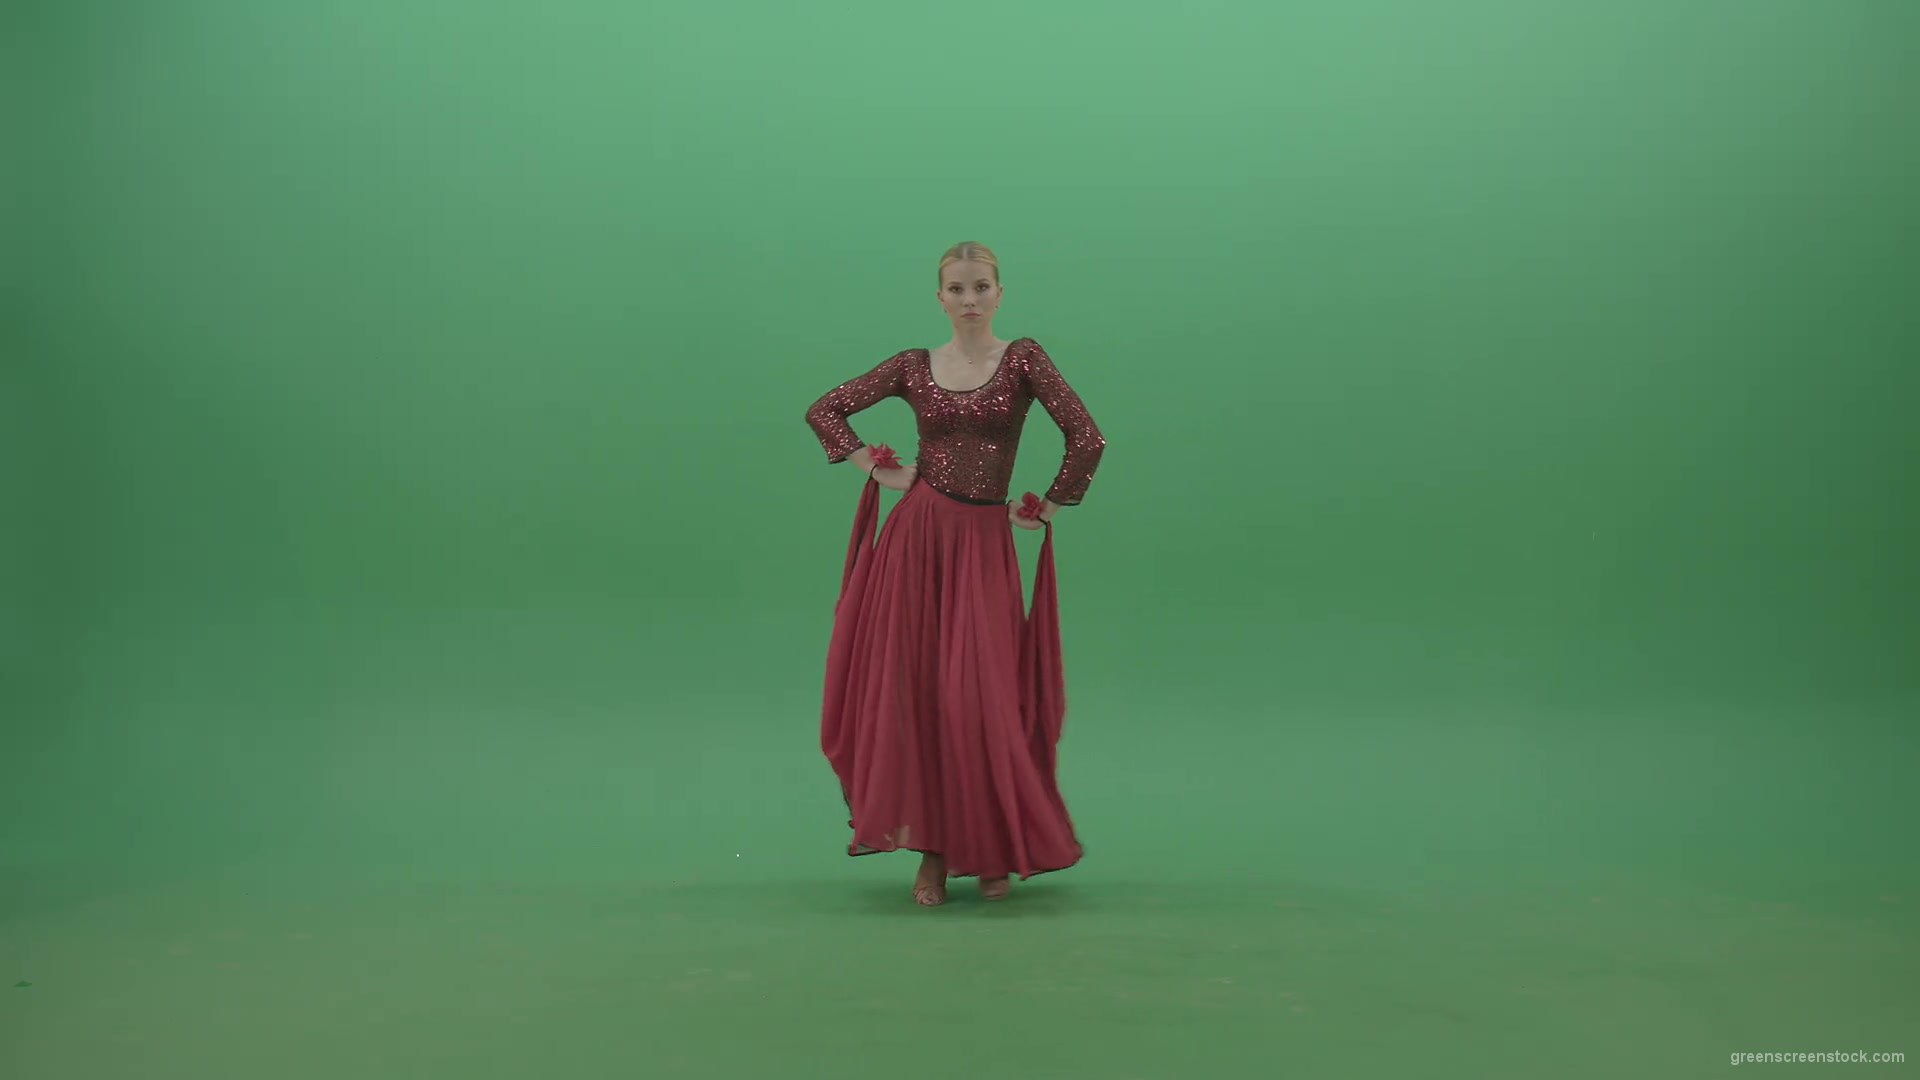 Blondie-in-red-latino-wear-moving-and-dance-on-green-screen-4K-Video-Footage-1920_002 Green Screen Stock